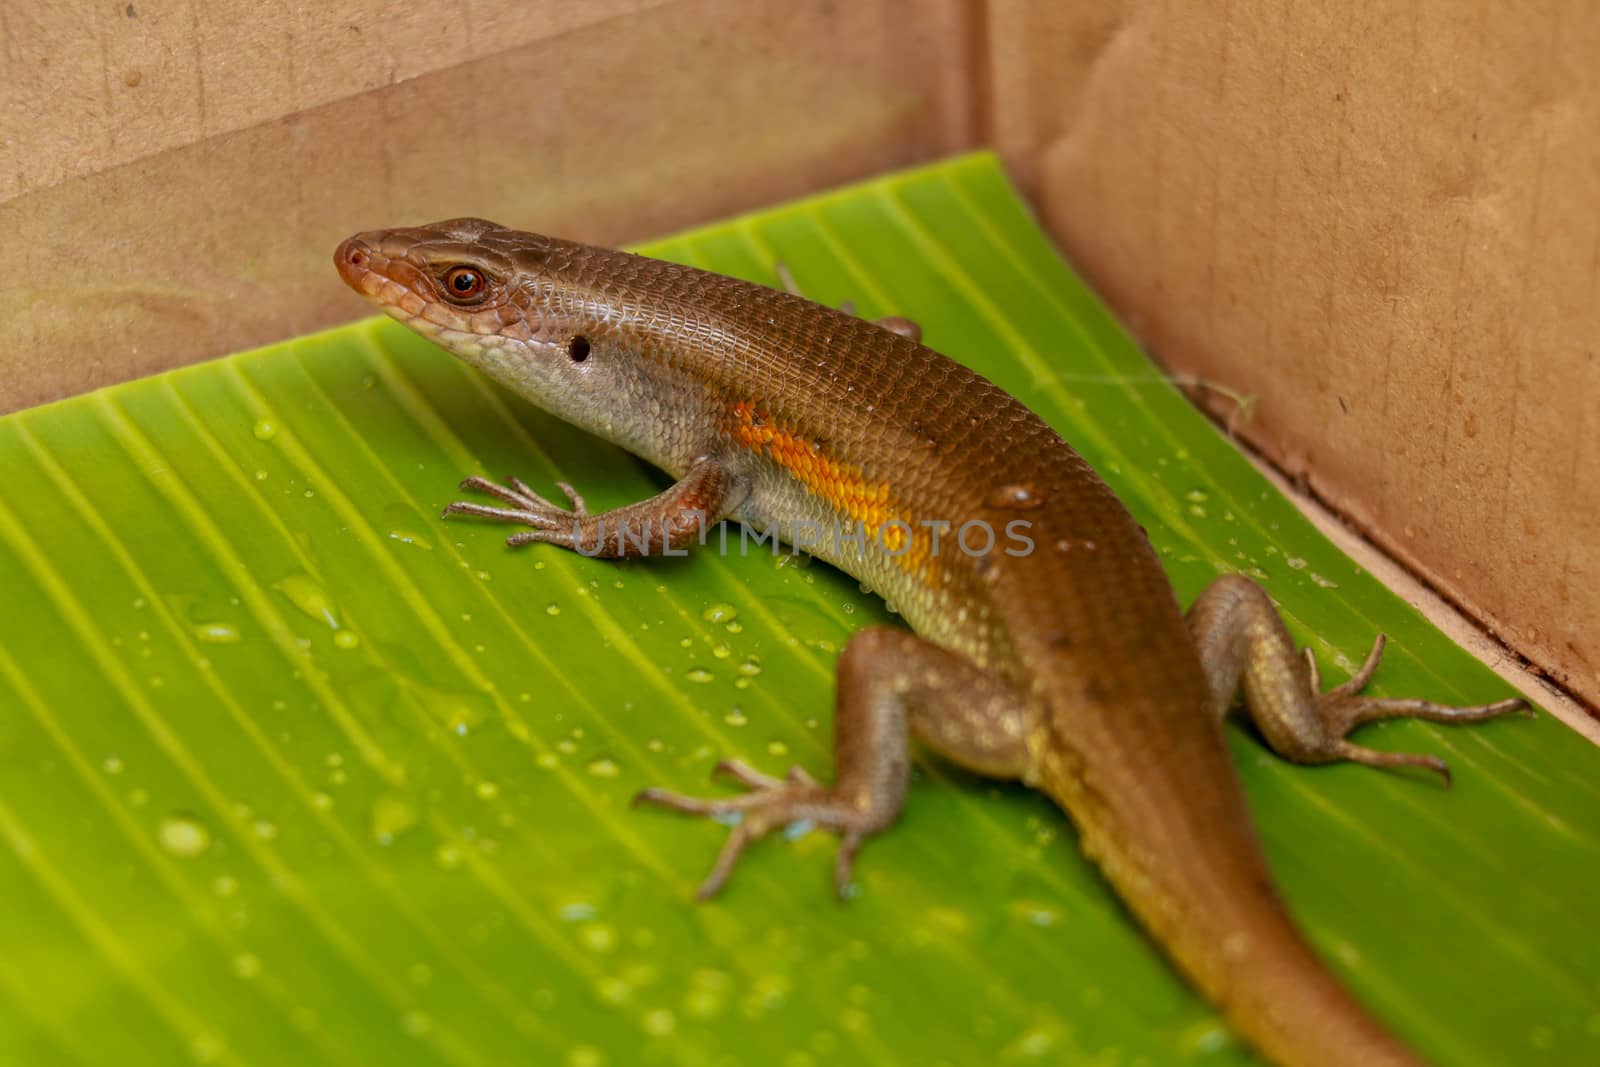 Balinese Skink. Lizard Eutropis multifasciata on a wet green leaf between water camps. Most species of skinks have long, tapering tails that they can shed if a predator grabs the tail.